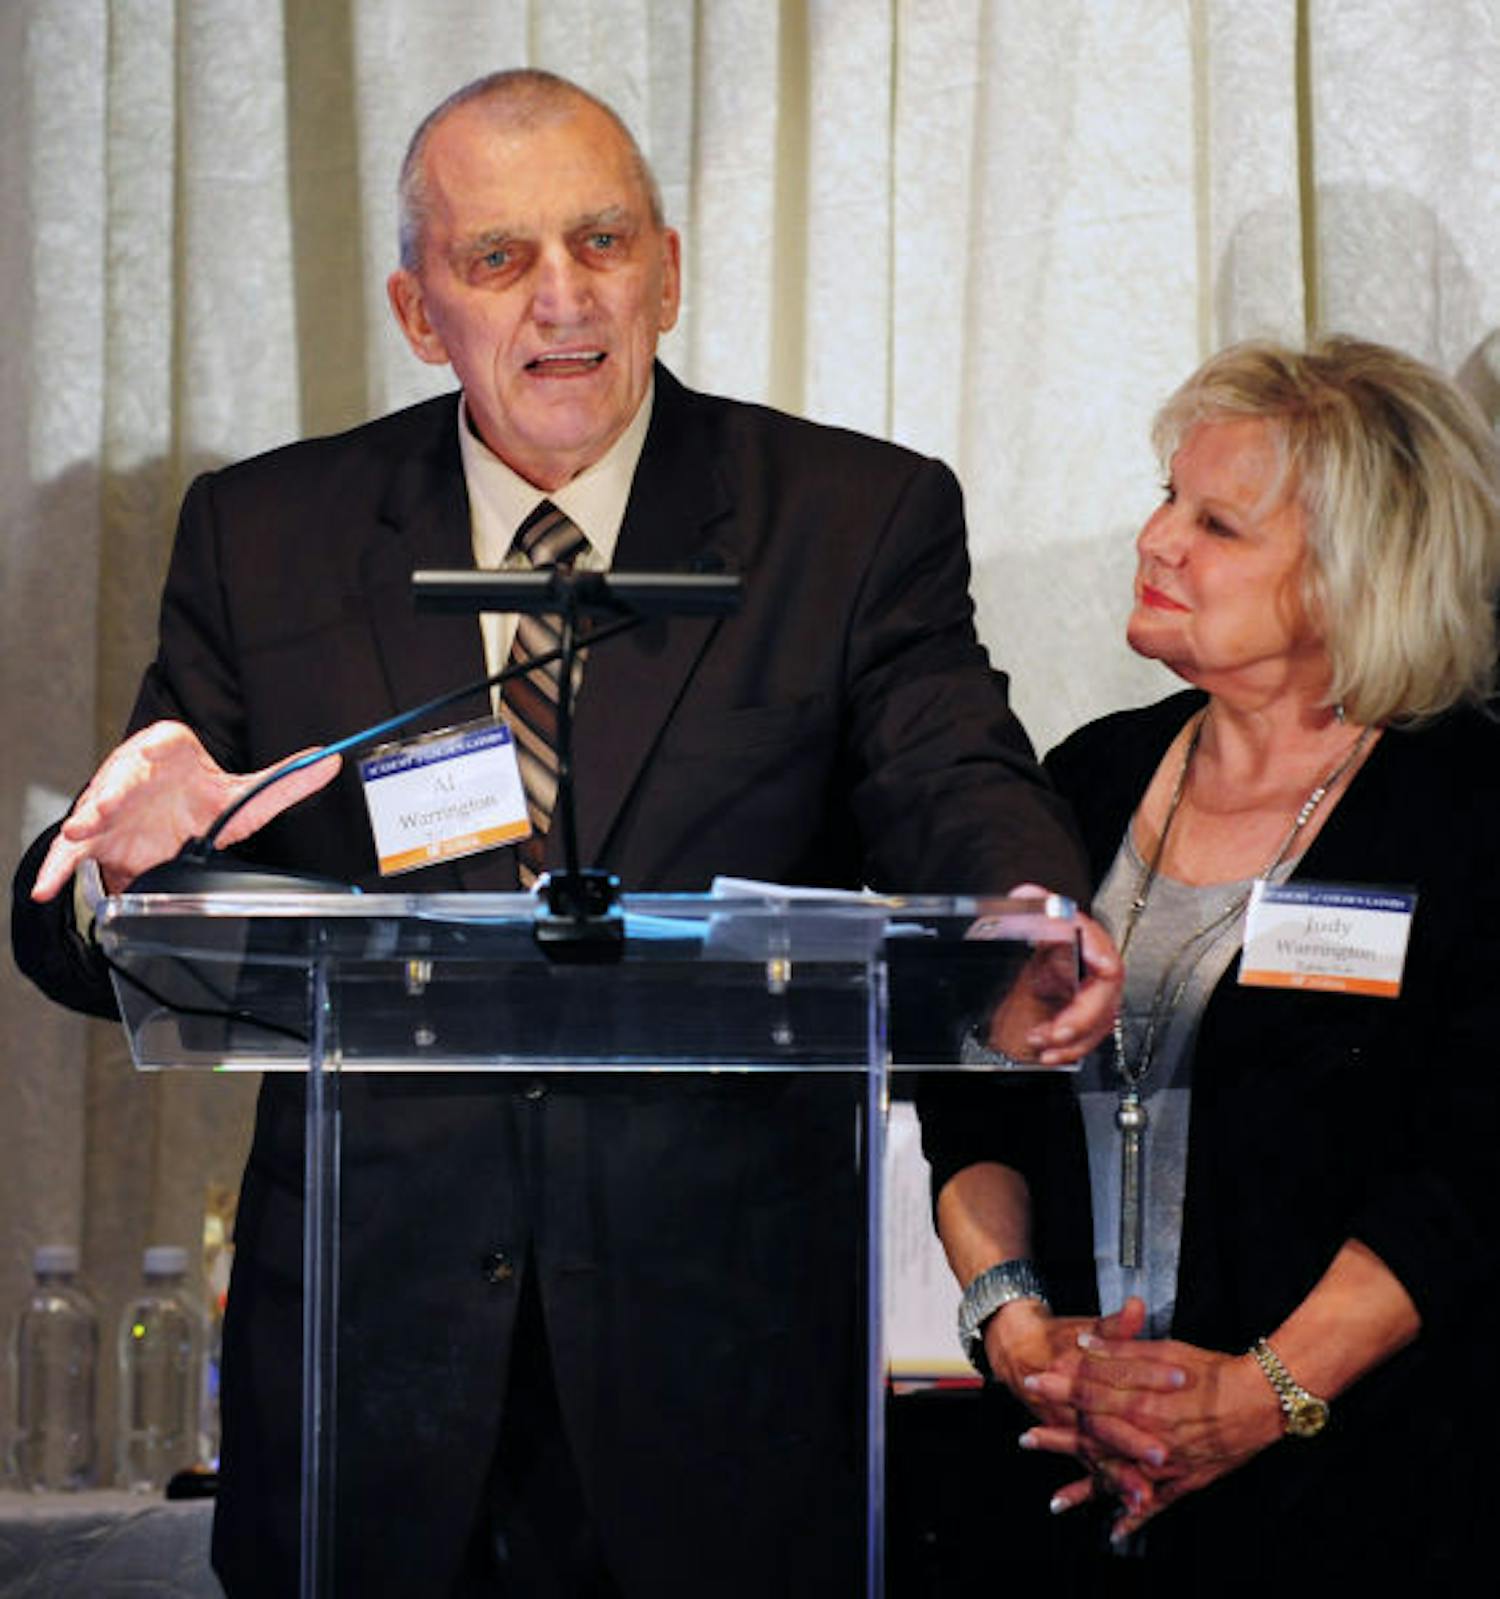 Al and Judy Warrington speak at a gala event held in their honor in Emerson Alumni Hall on Friday night. The Warringtons became the first $100 million donors after announcing a $75 million pledge at the event.